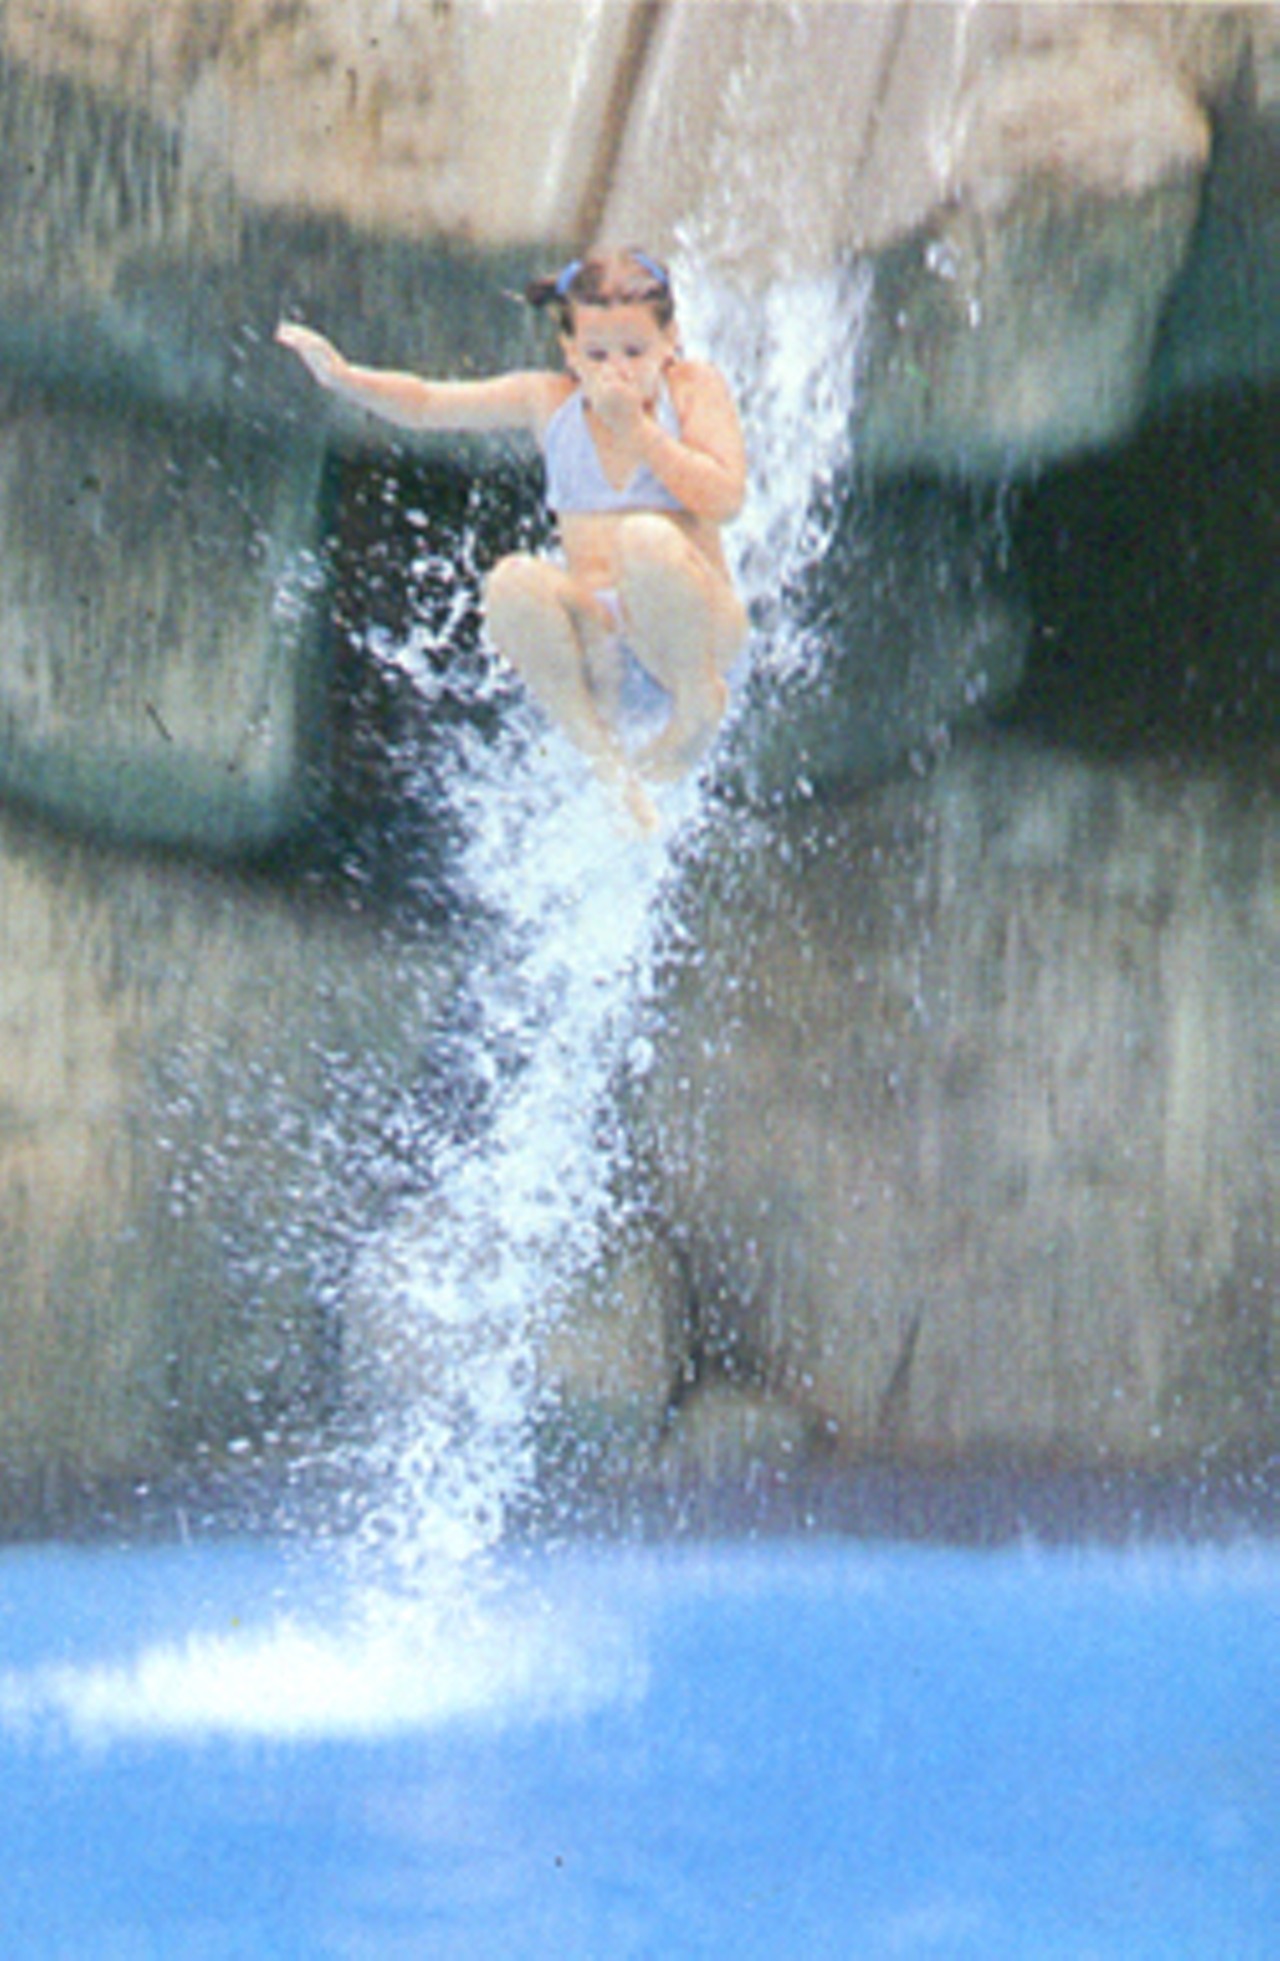 Some of the water slides ended in steep drop offs, which landed you into the pools below. Via lostepcot.com>/a>